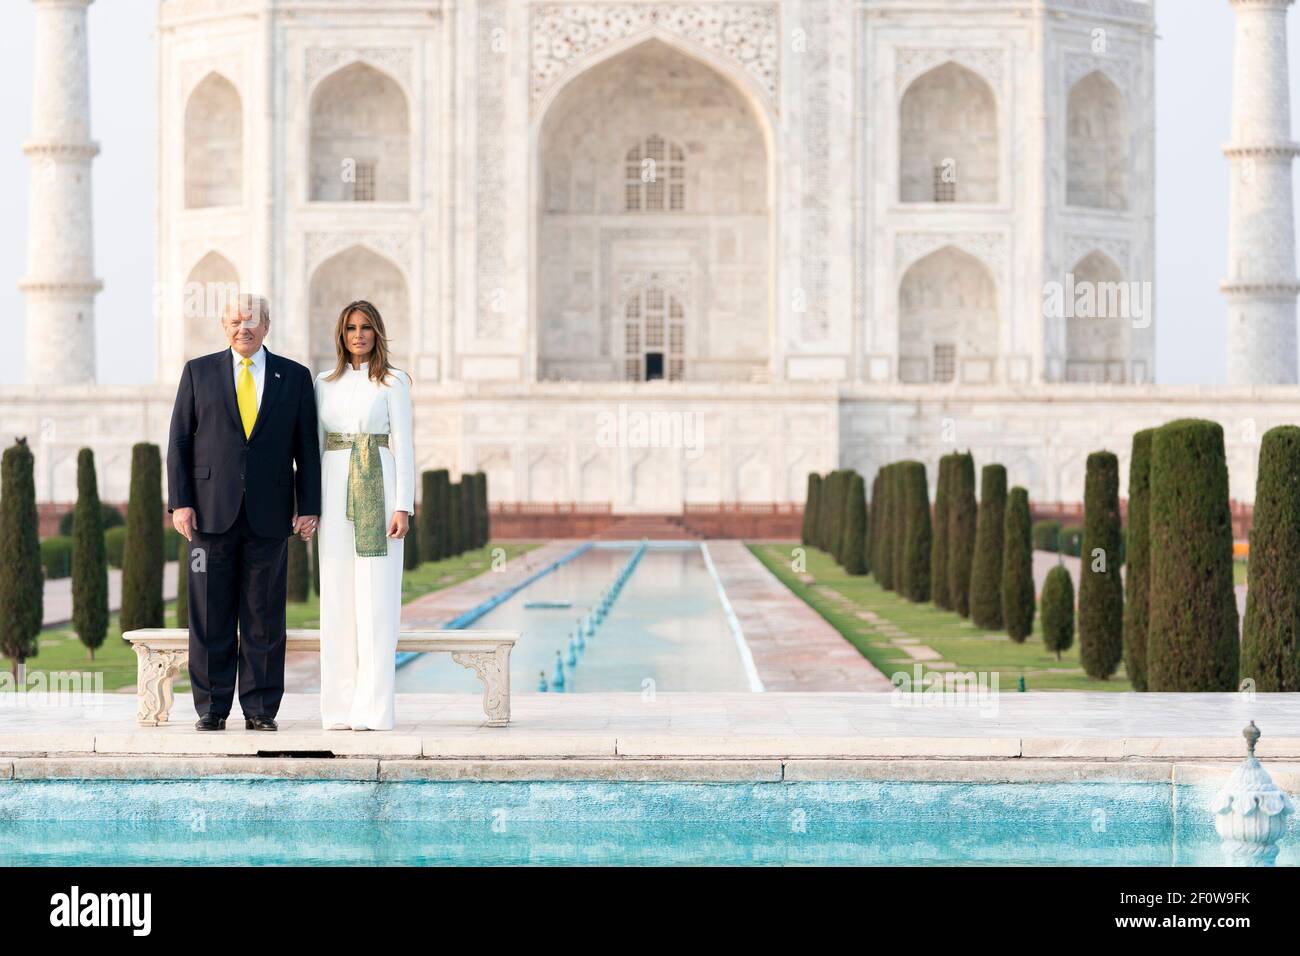 President Donald Trump and First Lady Melania Trump pose for a photo before the reflecting pool of the Taj Mahal Monday Feb. 24 2020 in Agra India. Stock Photo